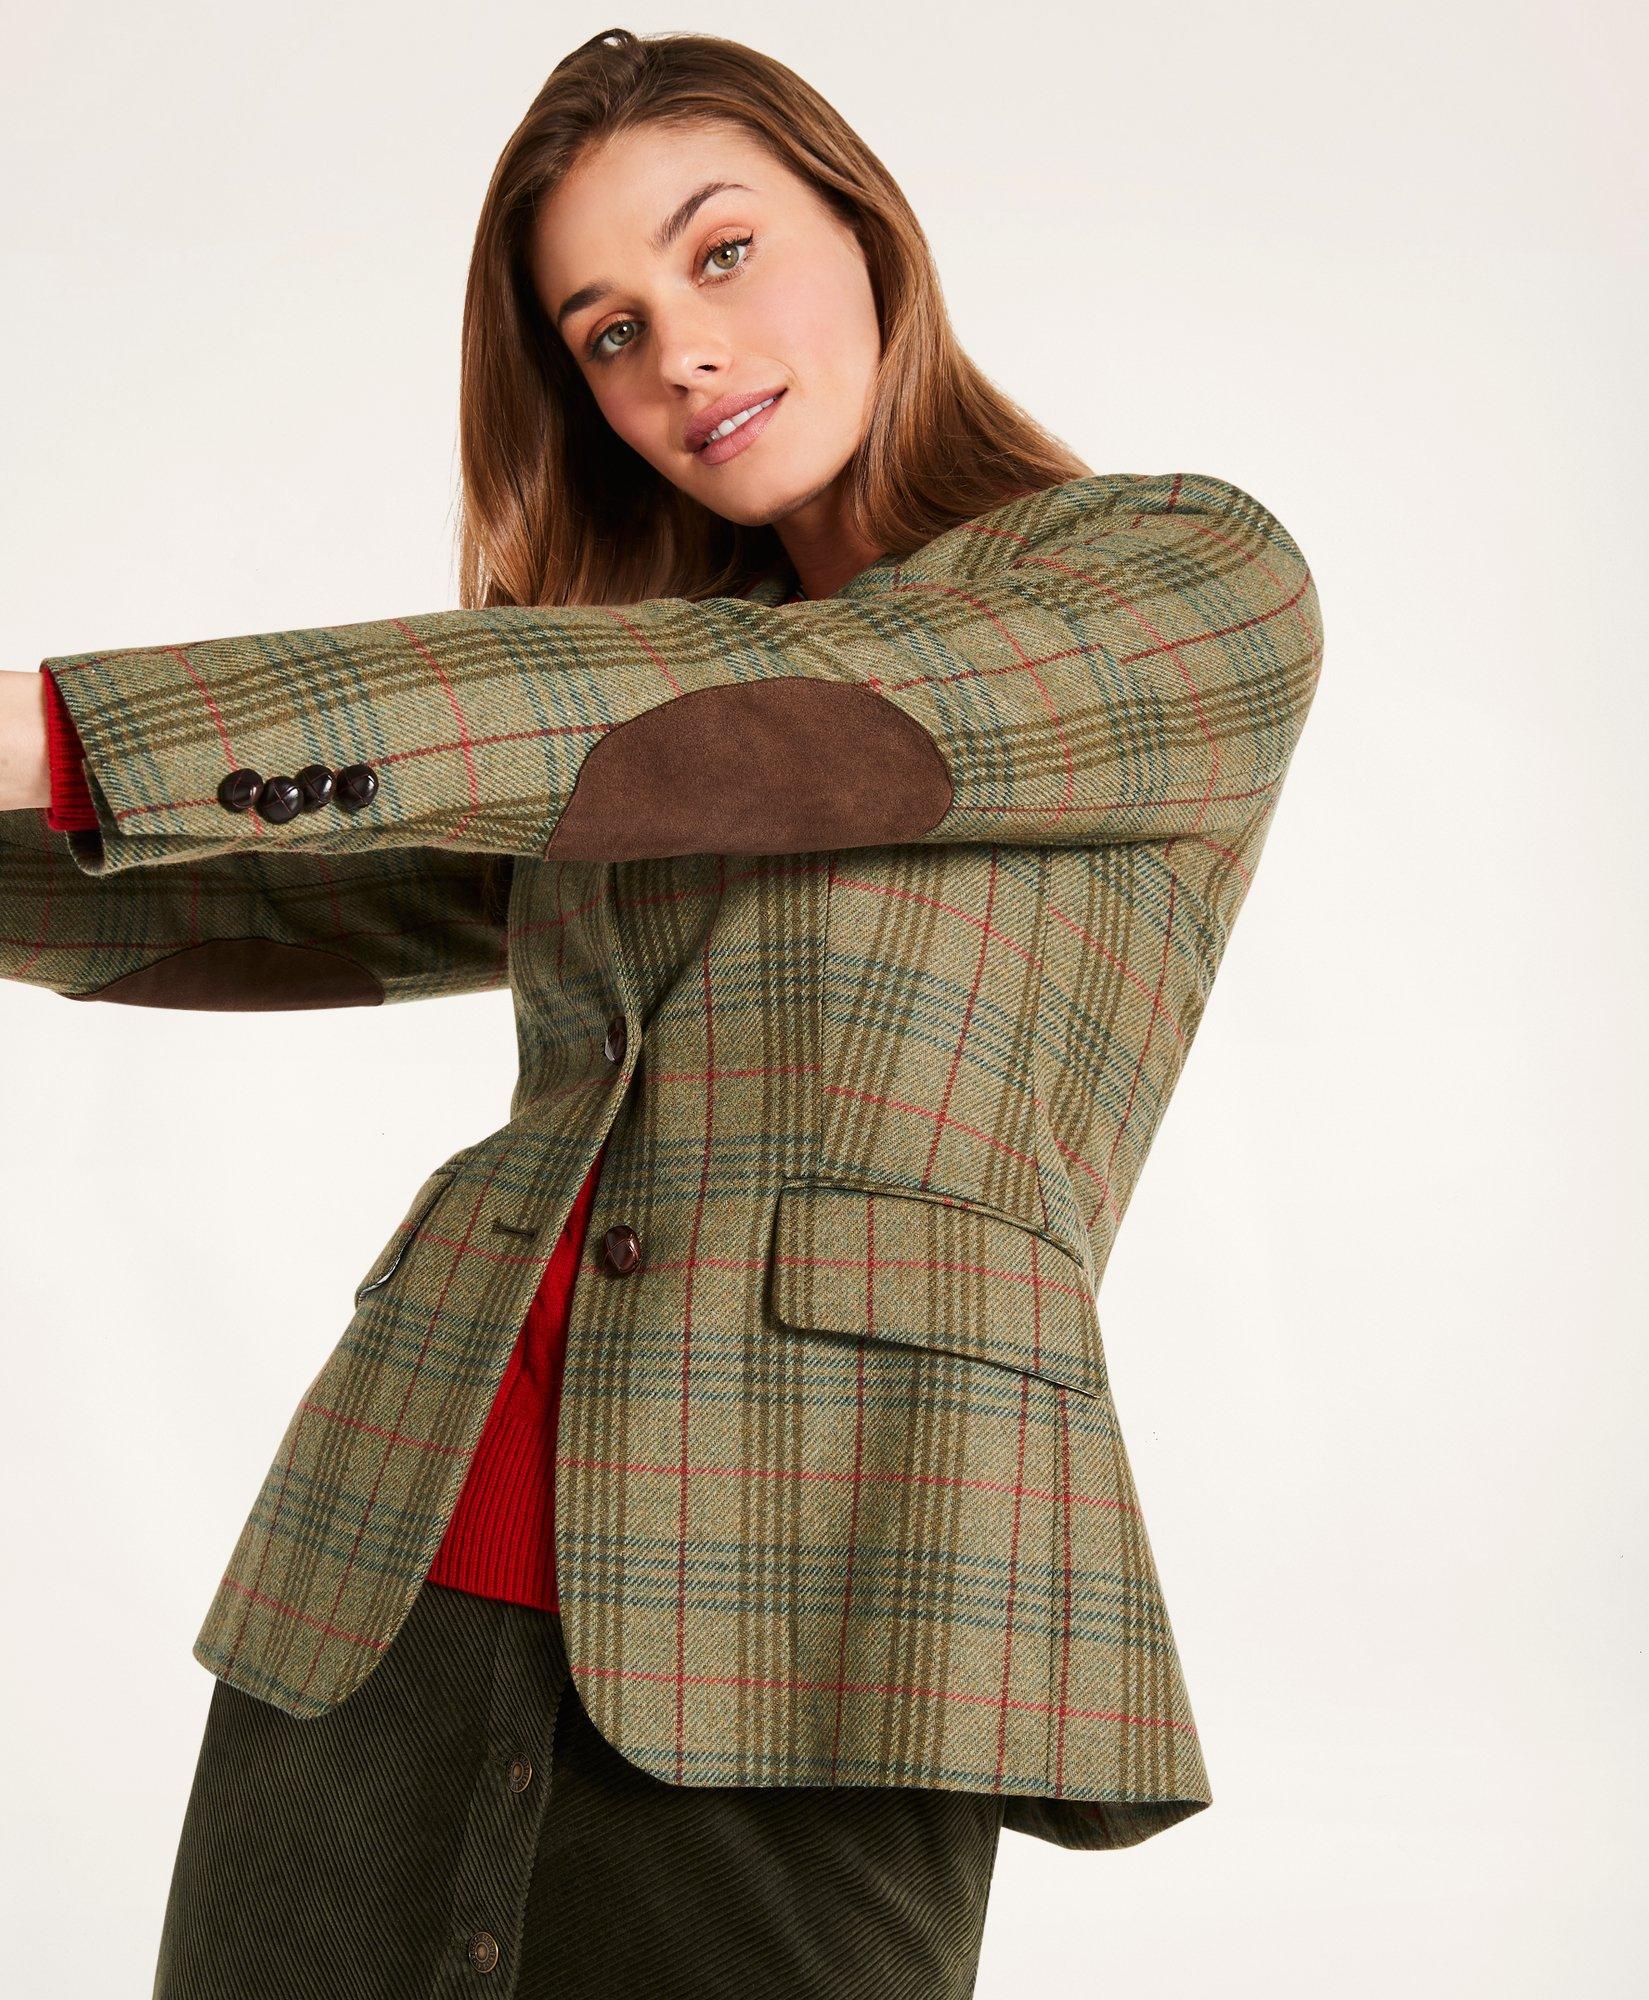  Cloth Robes For Women Plaid Jacket For Women